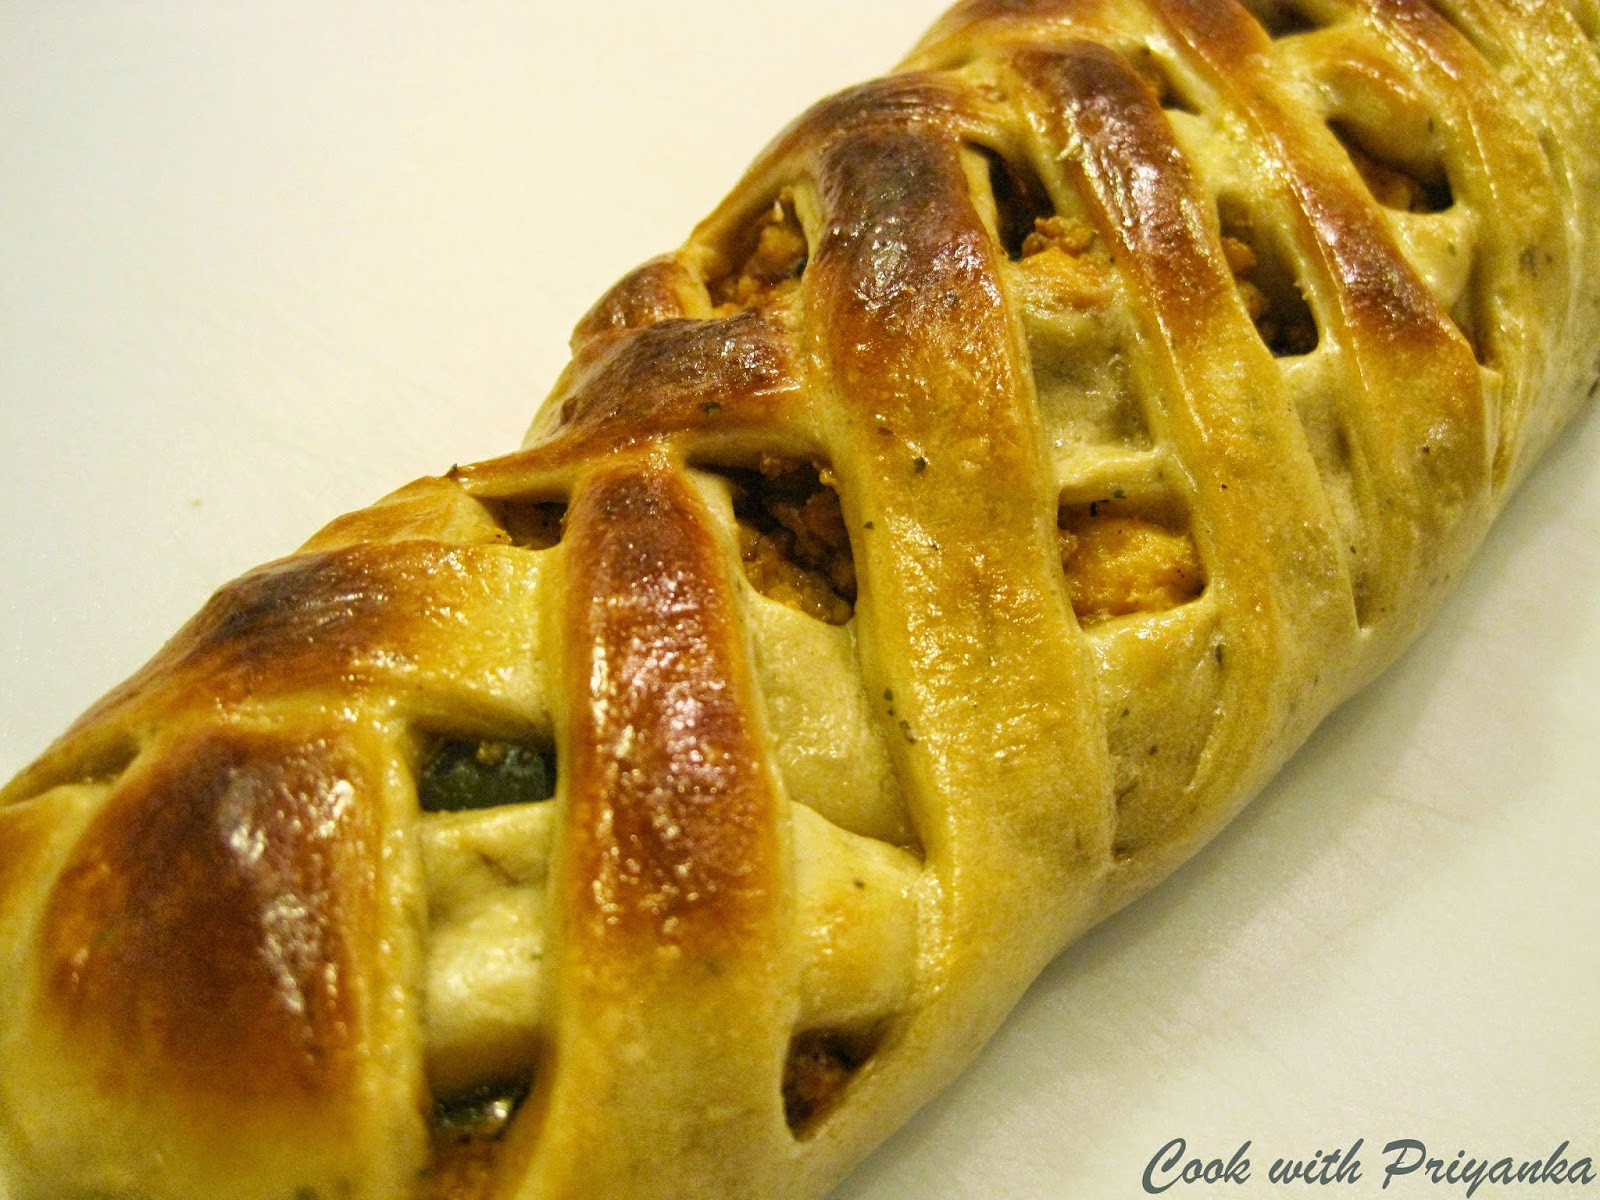 http://cookwithpriyankavarma.blogspot.co.uk/2014/06/braided-bread-stuffed-with-paneer.html